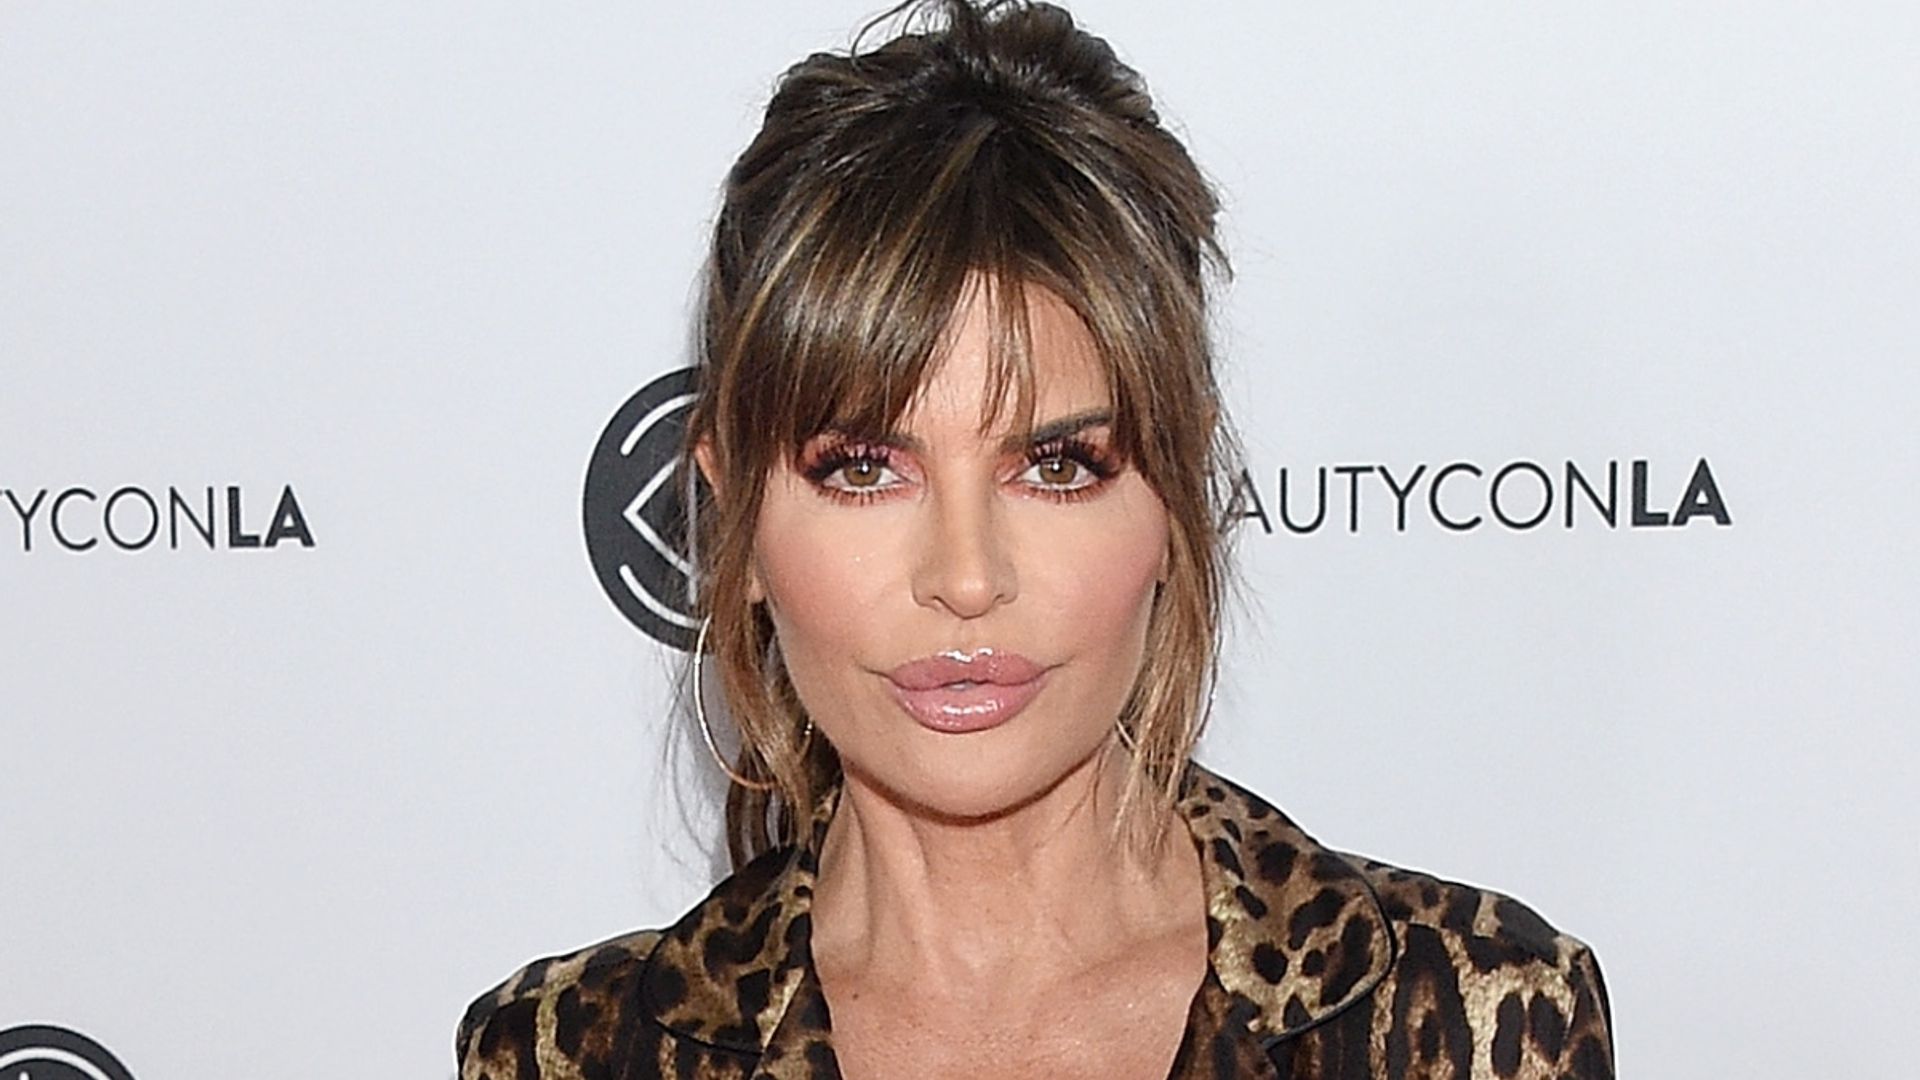 lisa rinna vacation photo surprising celebrity appearance